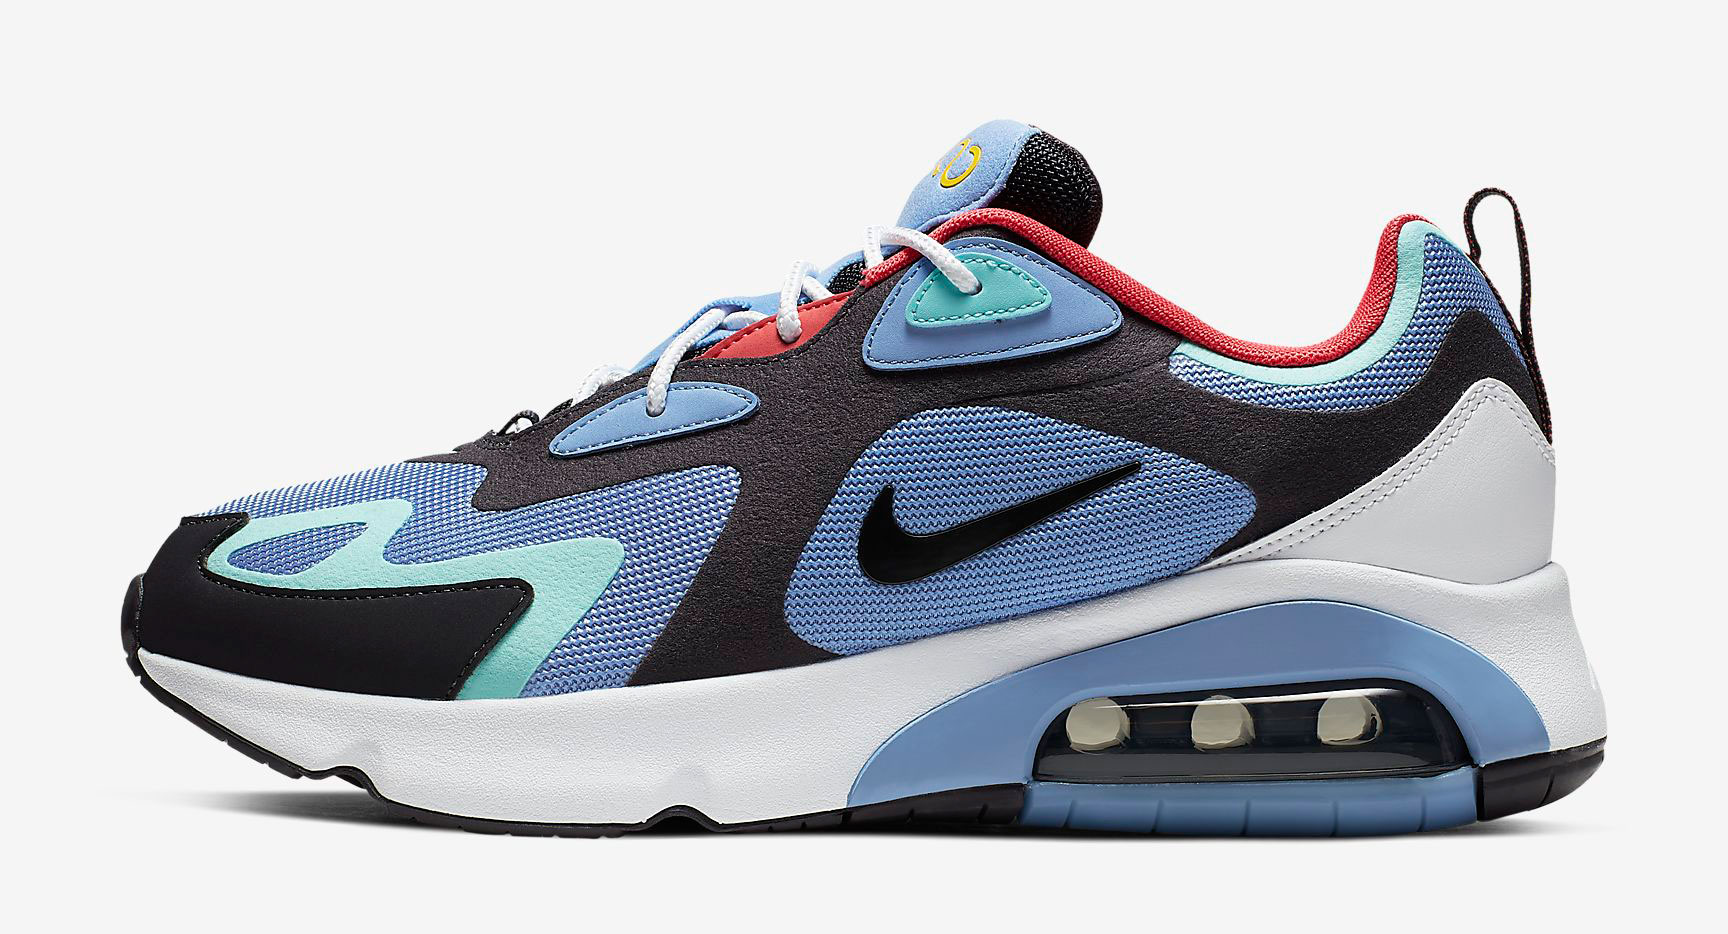 nike-air-max-200-1992-world-stage-release-date